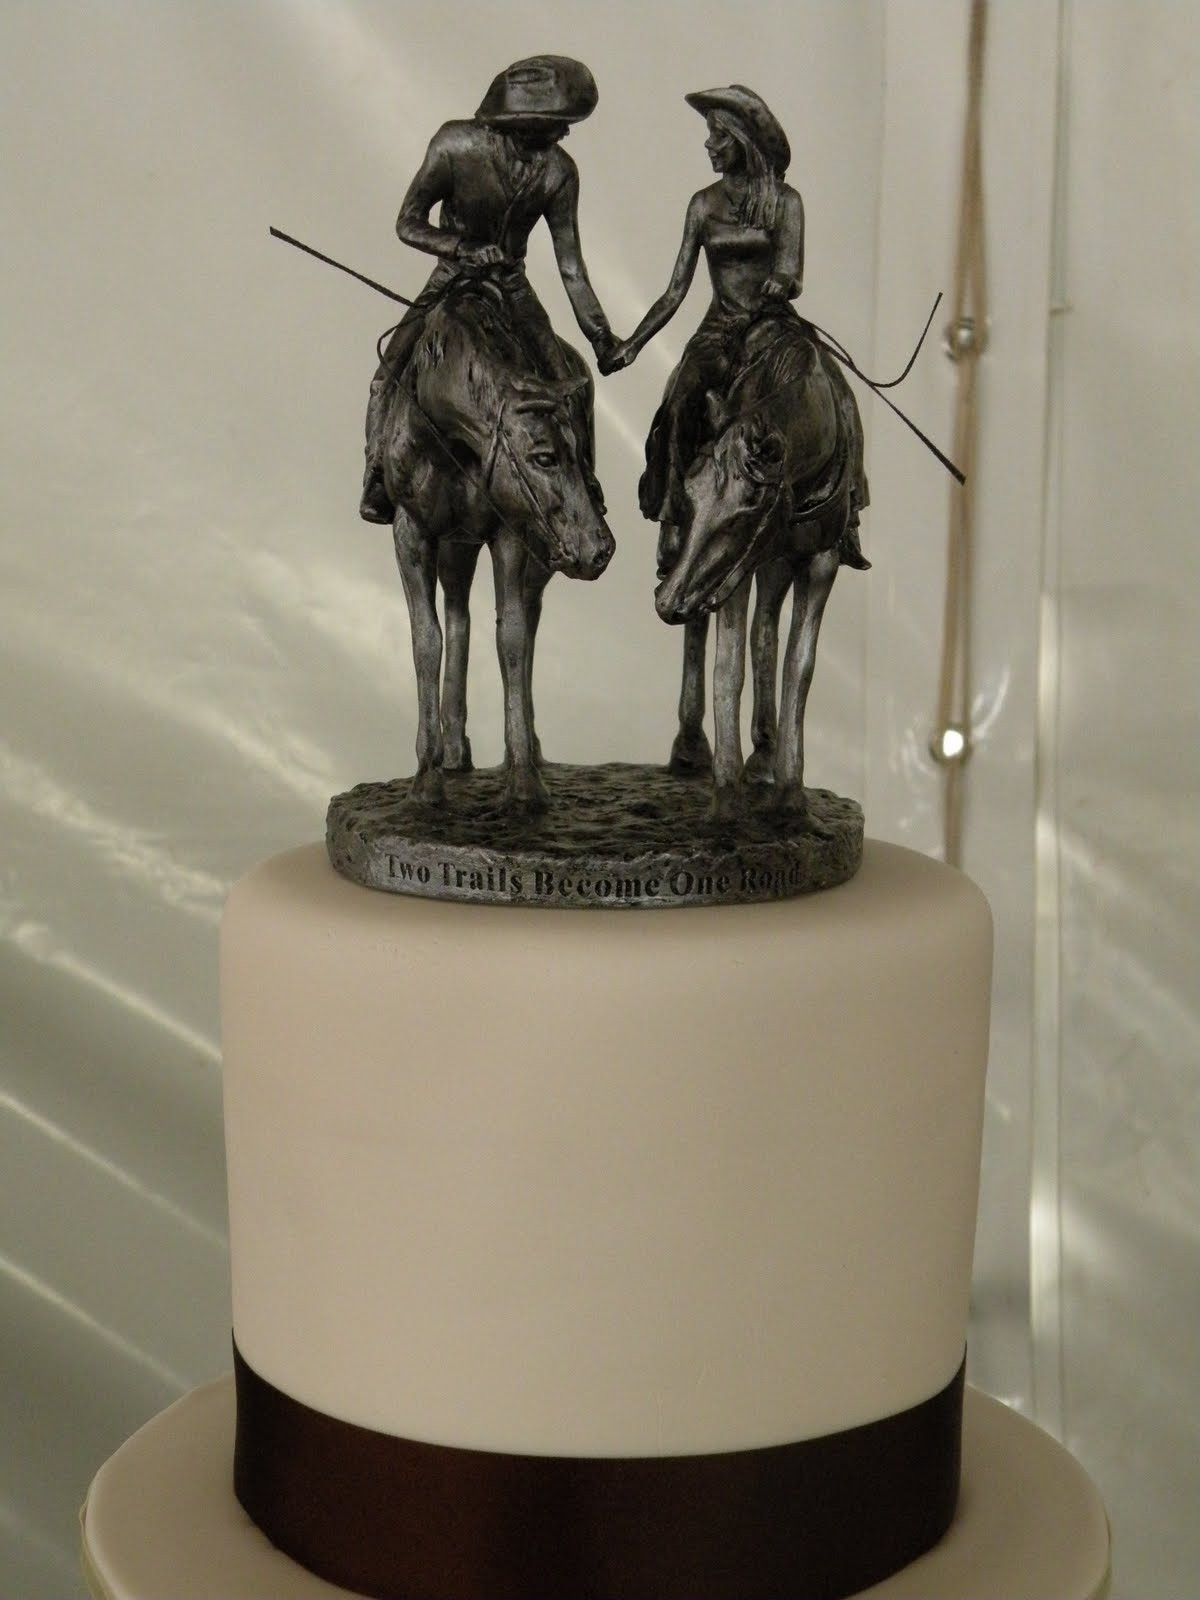 Horse Cake Toppers For Wedding Cakes
 Horse wedding cake toppers Include Your Love of Horses